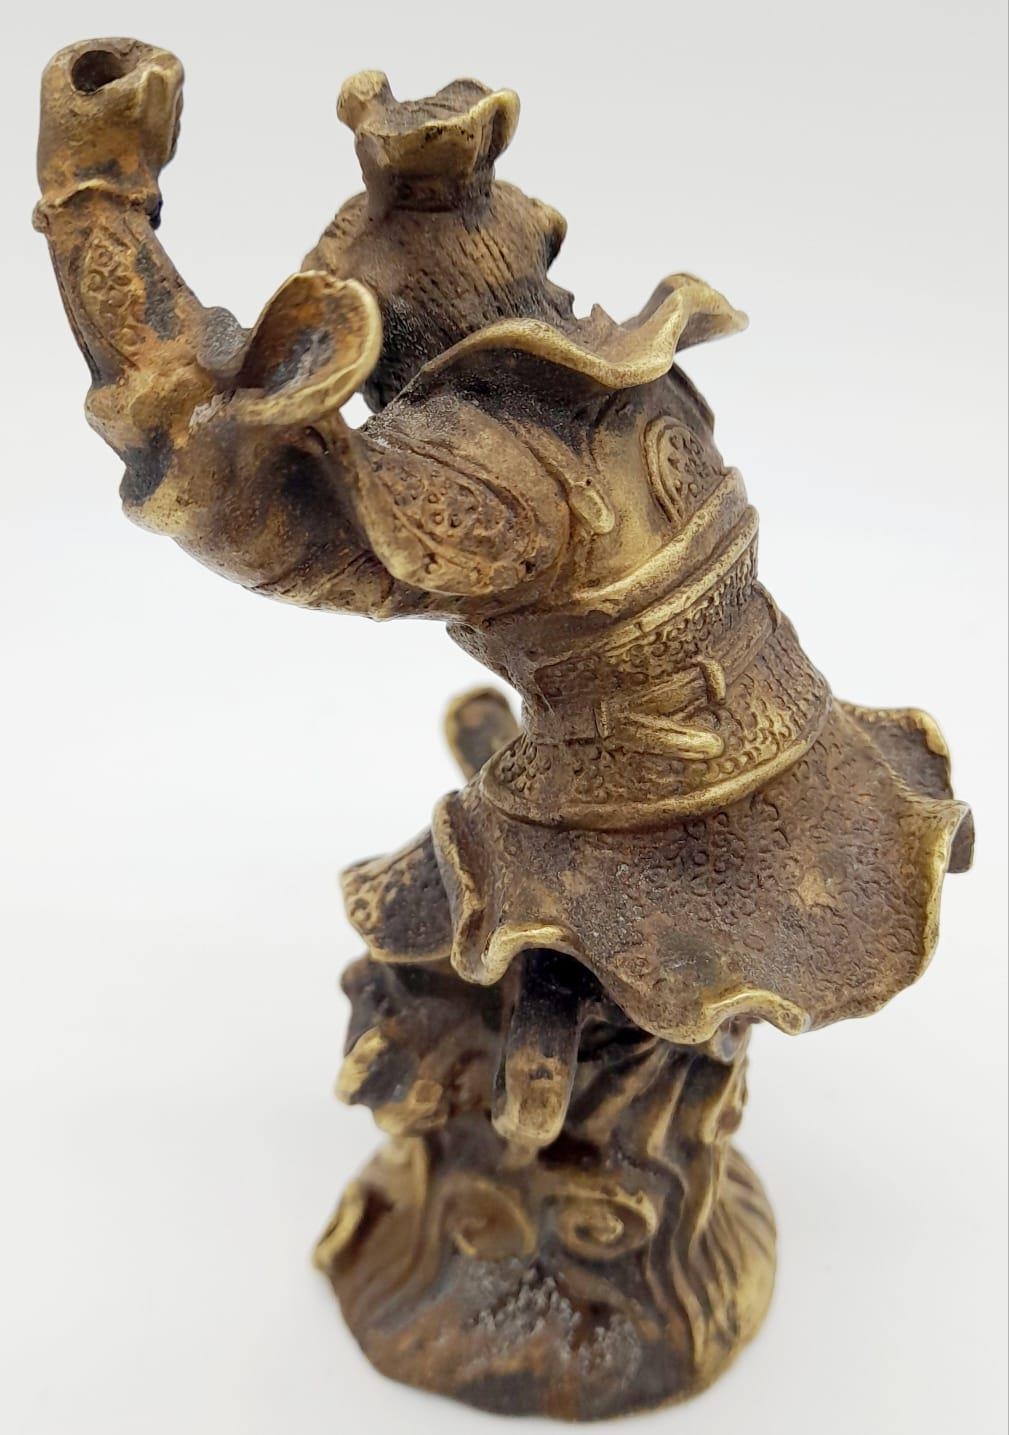 An Antique (Mid 19th Century) Chinese Monkey God Bronze Figure. Excellent casting and detail. - Image 4 of 6